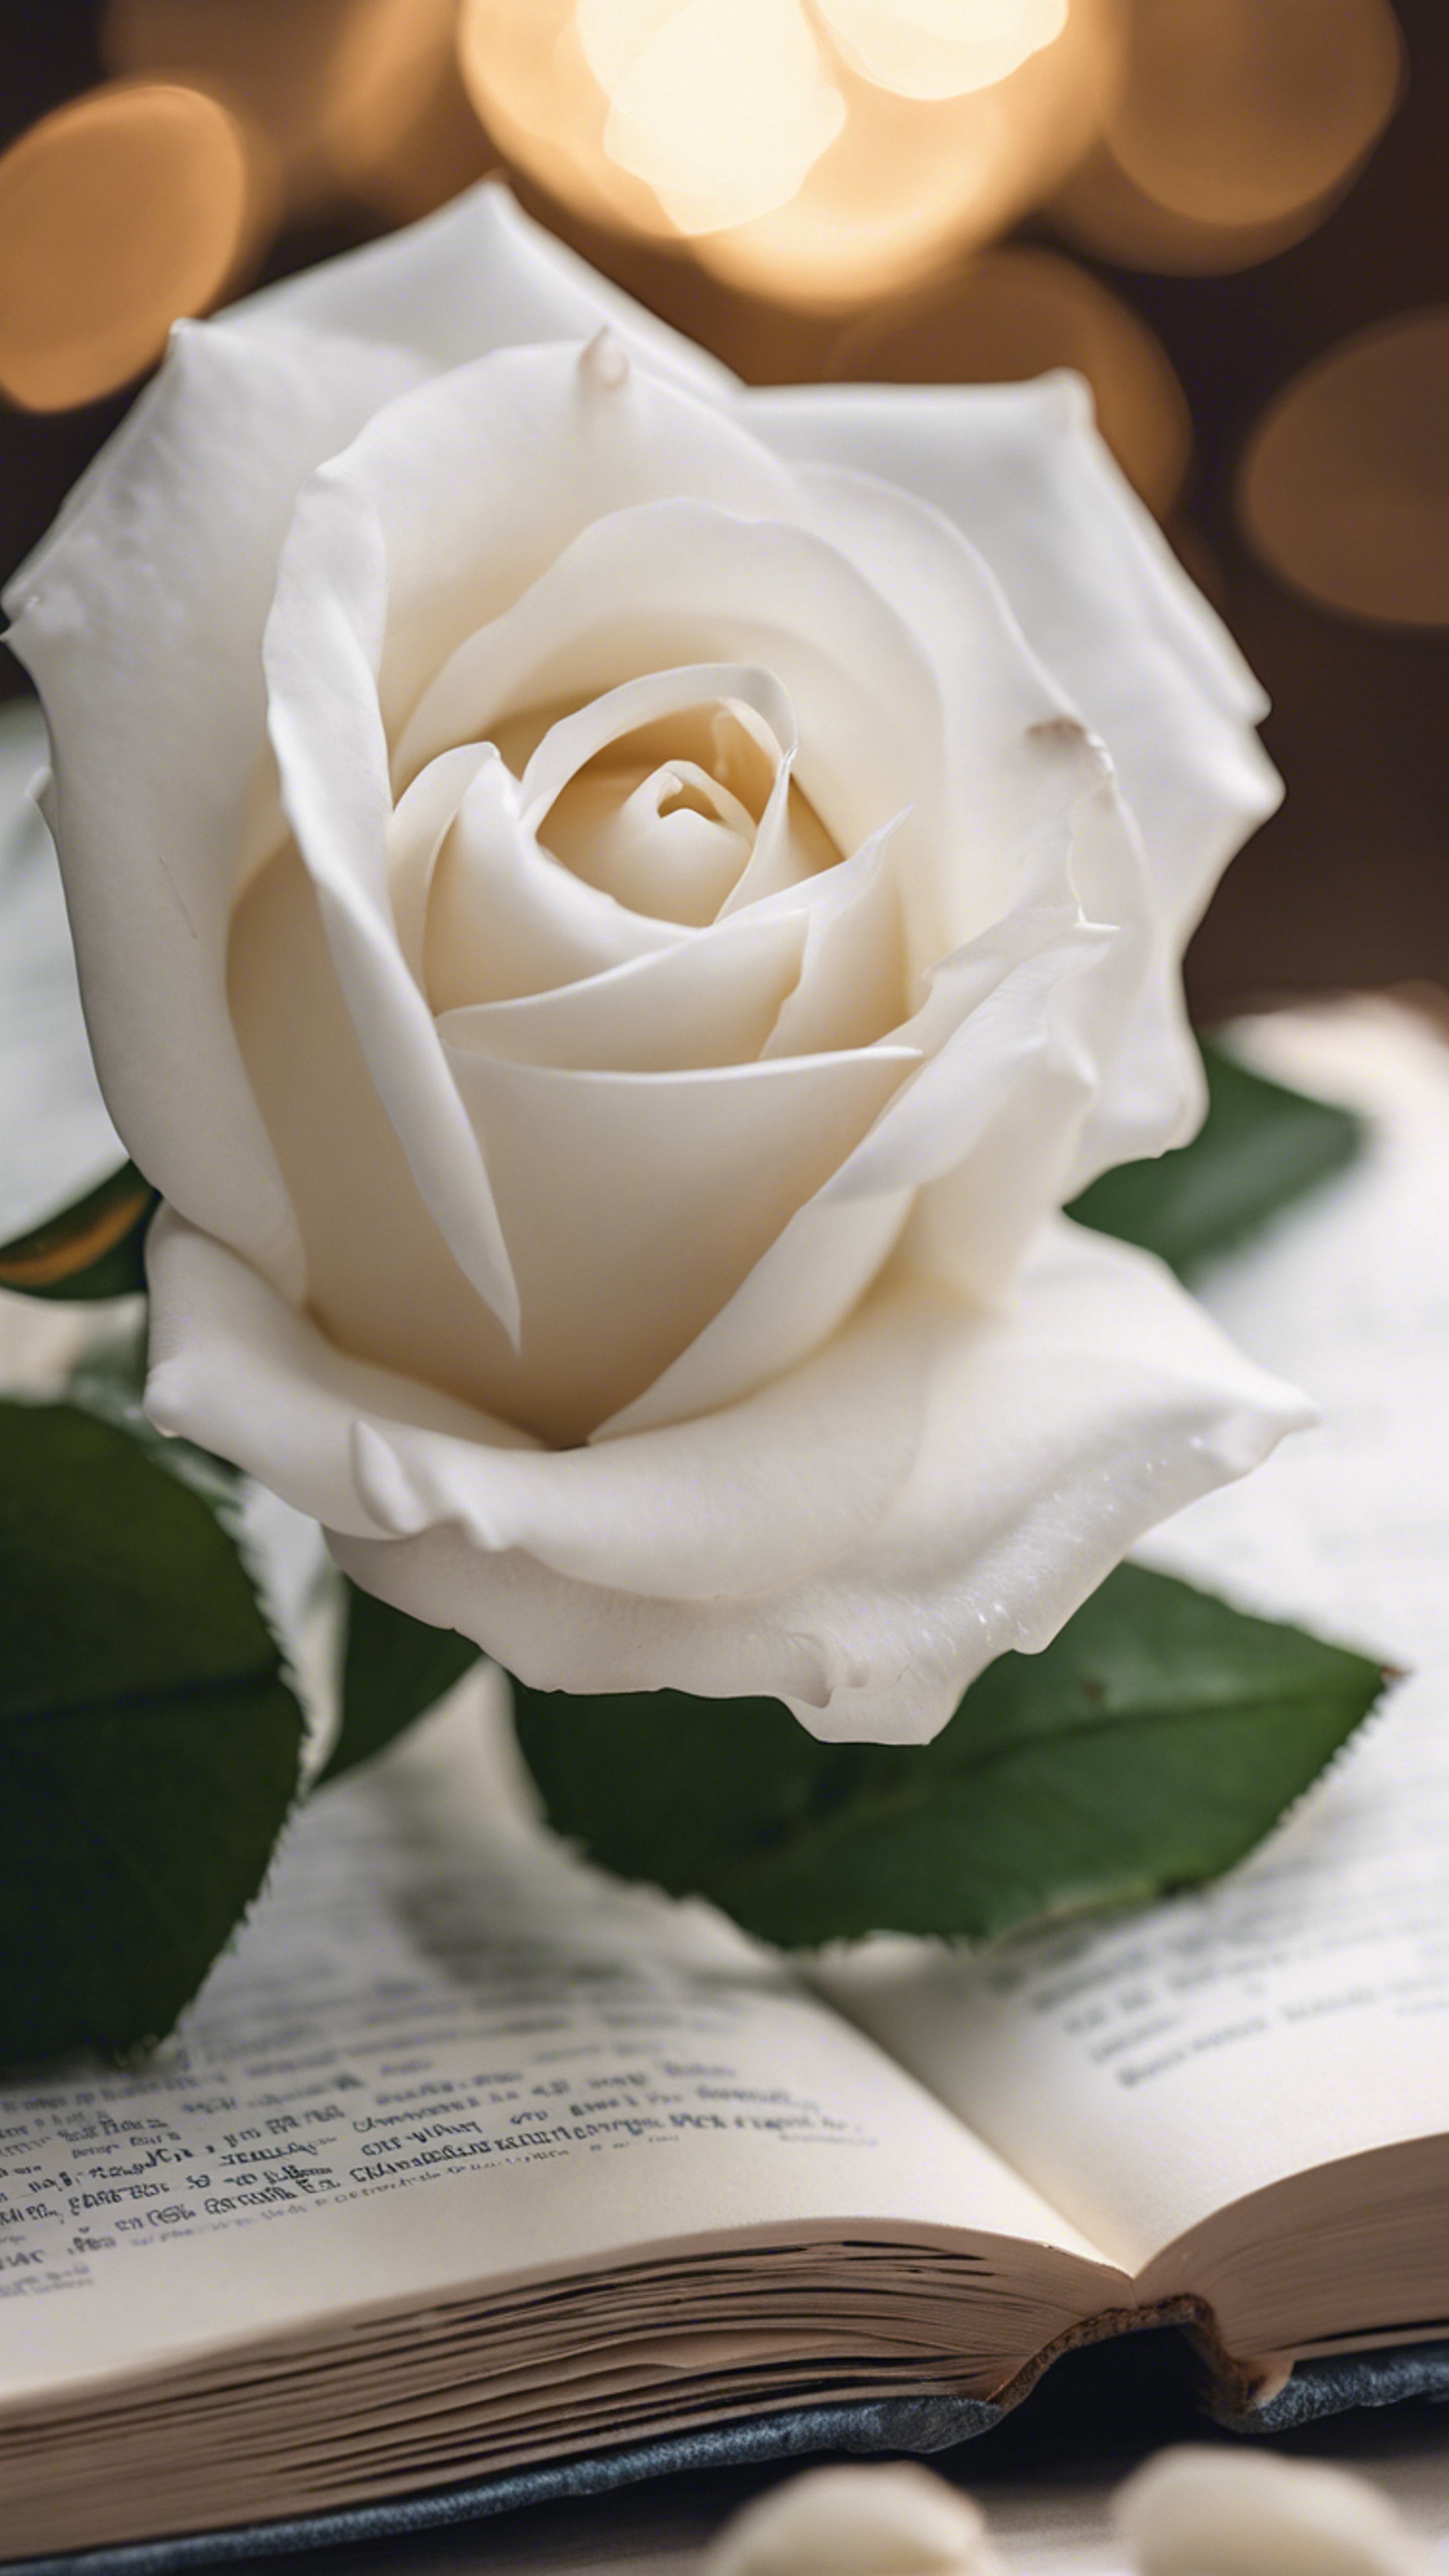 A serene white rose perched on an open hardcover book. Валлпапер[5eeaaa5d95634df1b3fb]